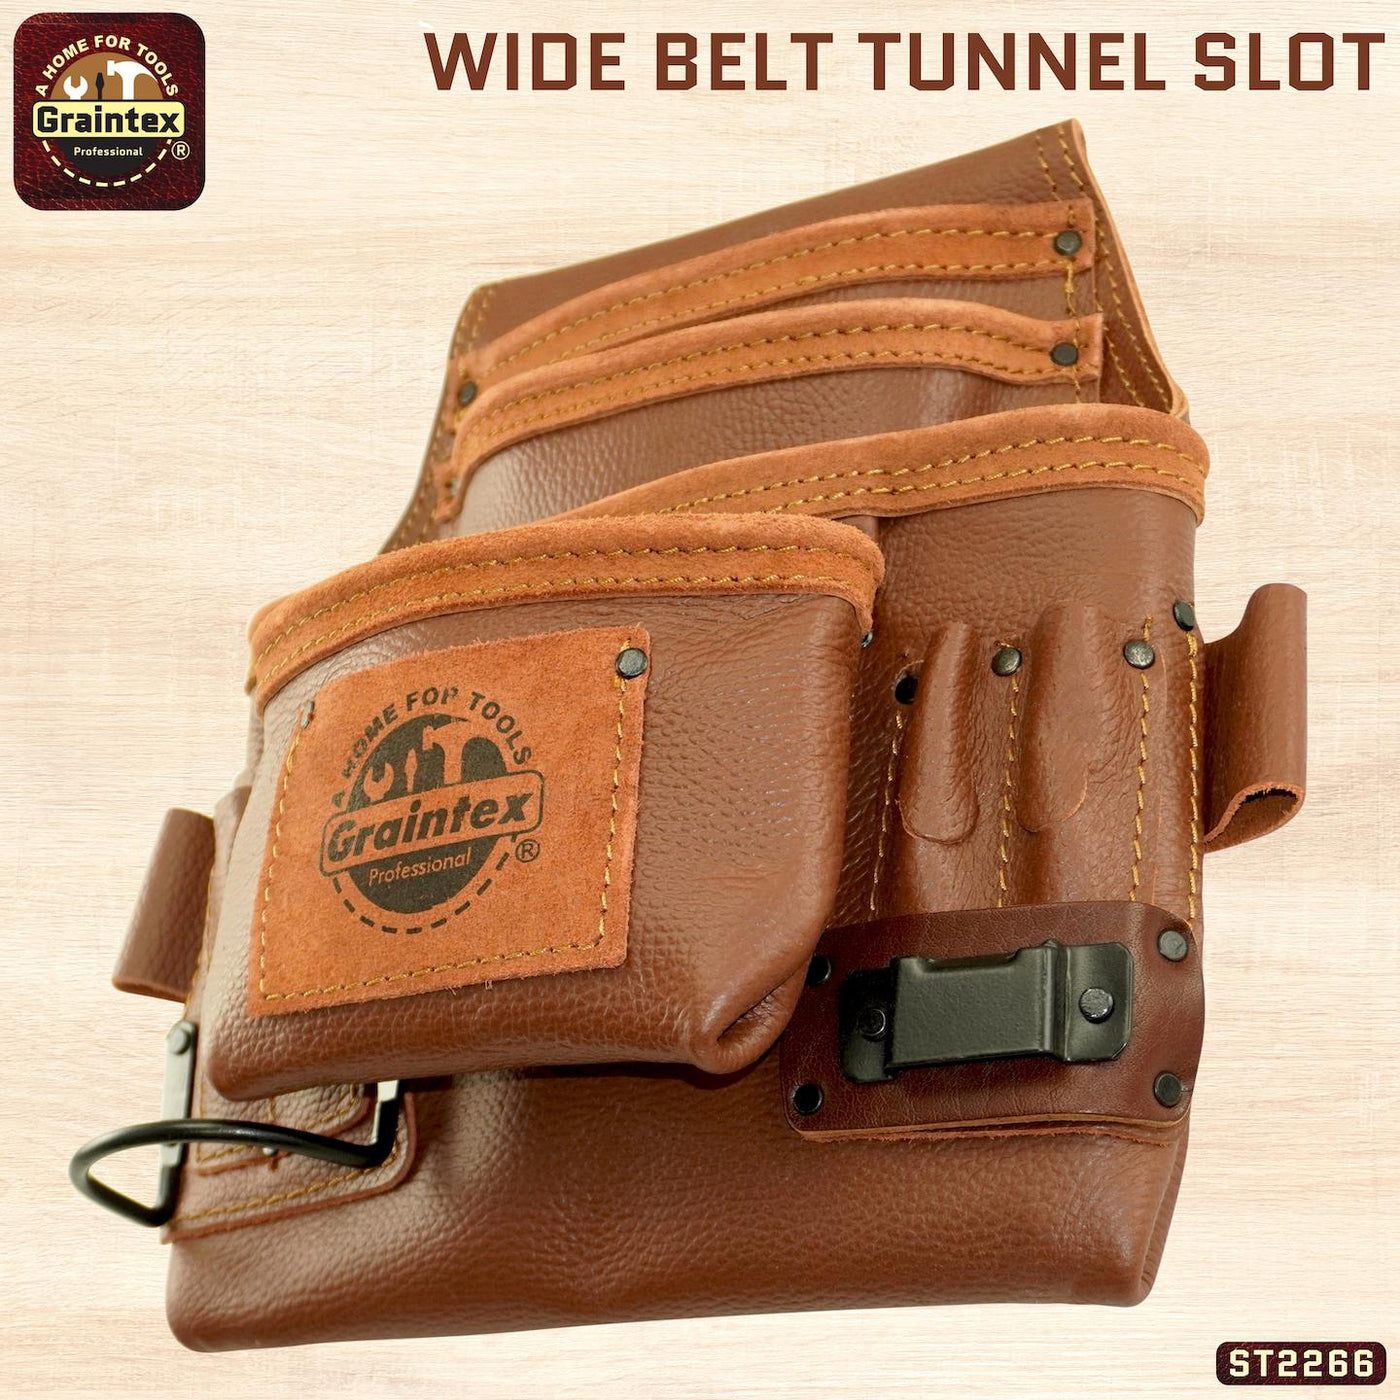 ST2266 :: 10 Pocket Nail & Tool Pouch Brown Color RUGGED Top Grain Leather